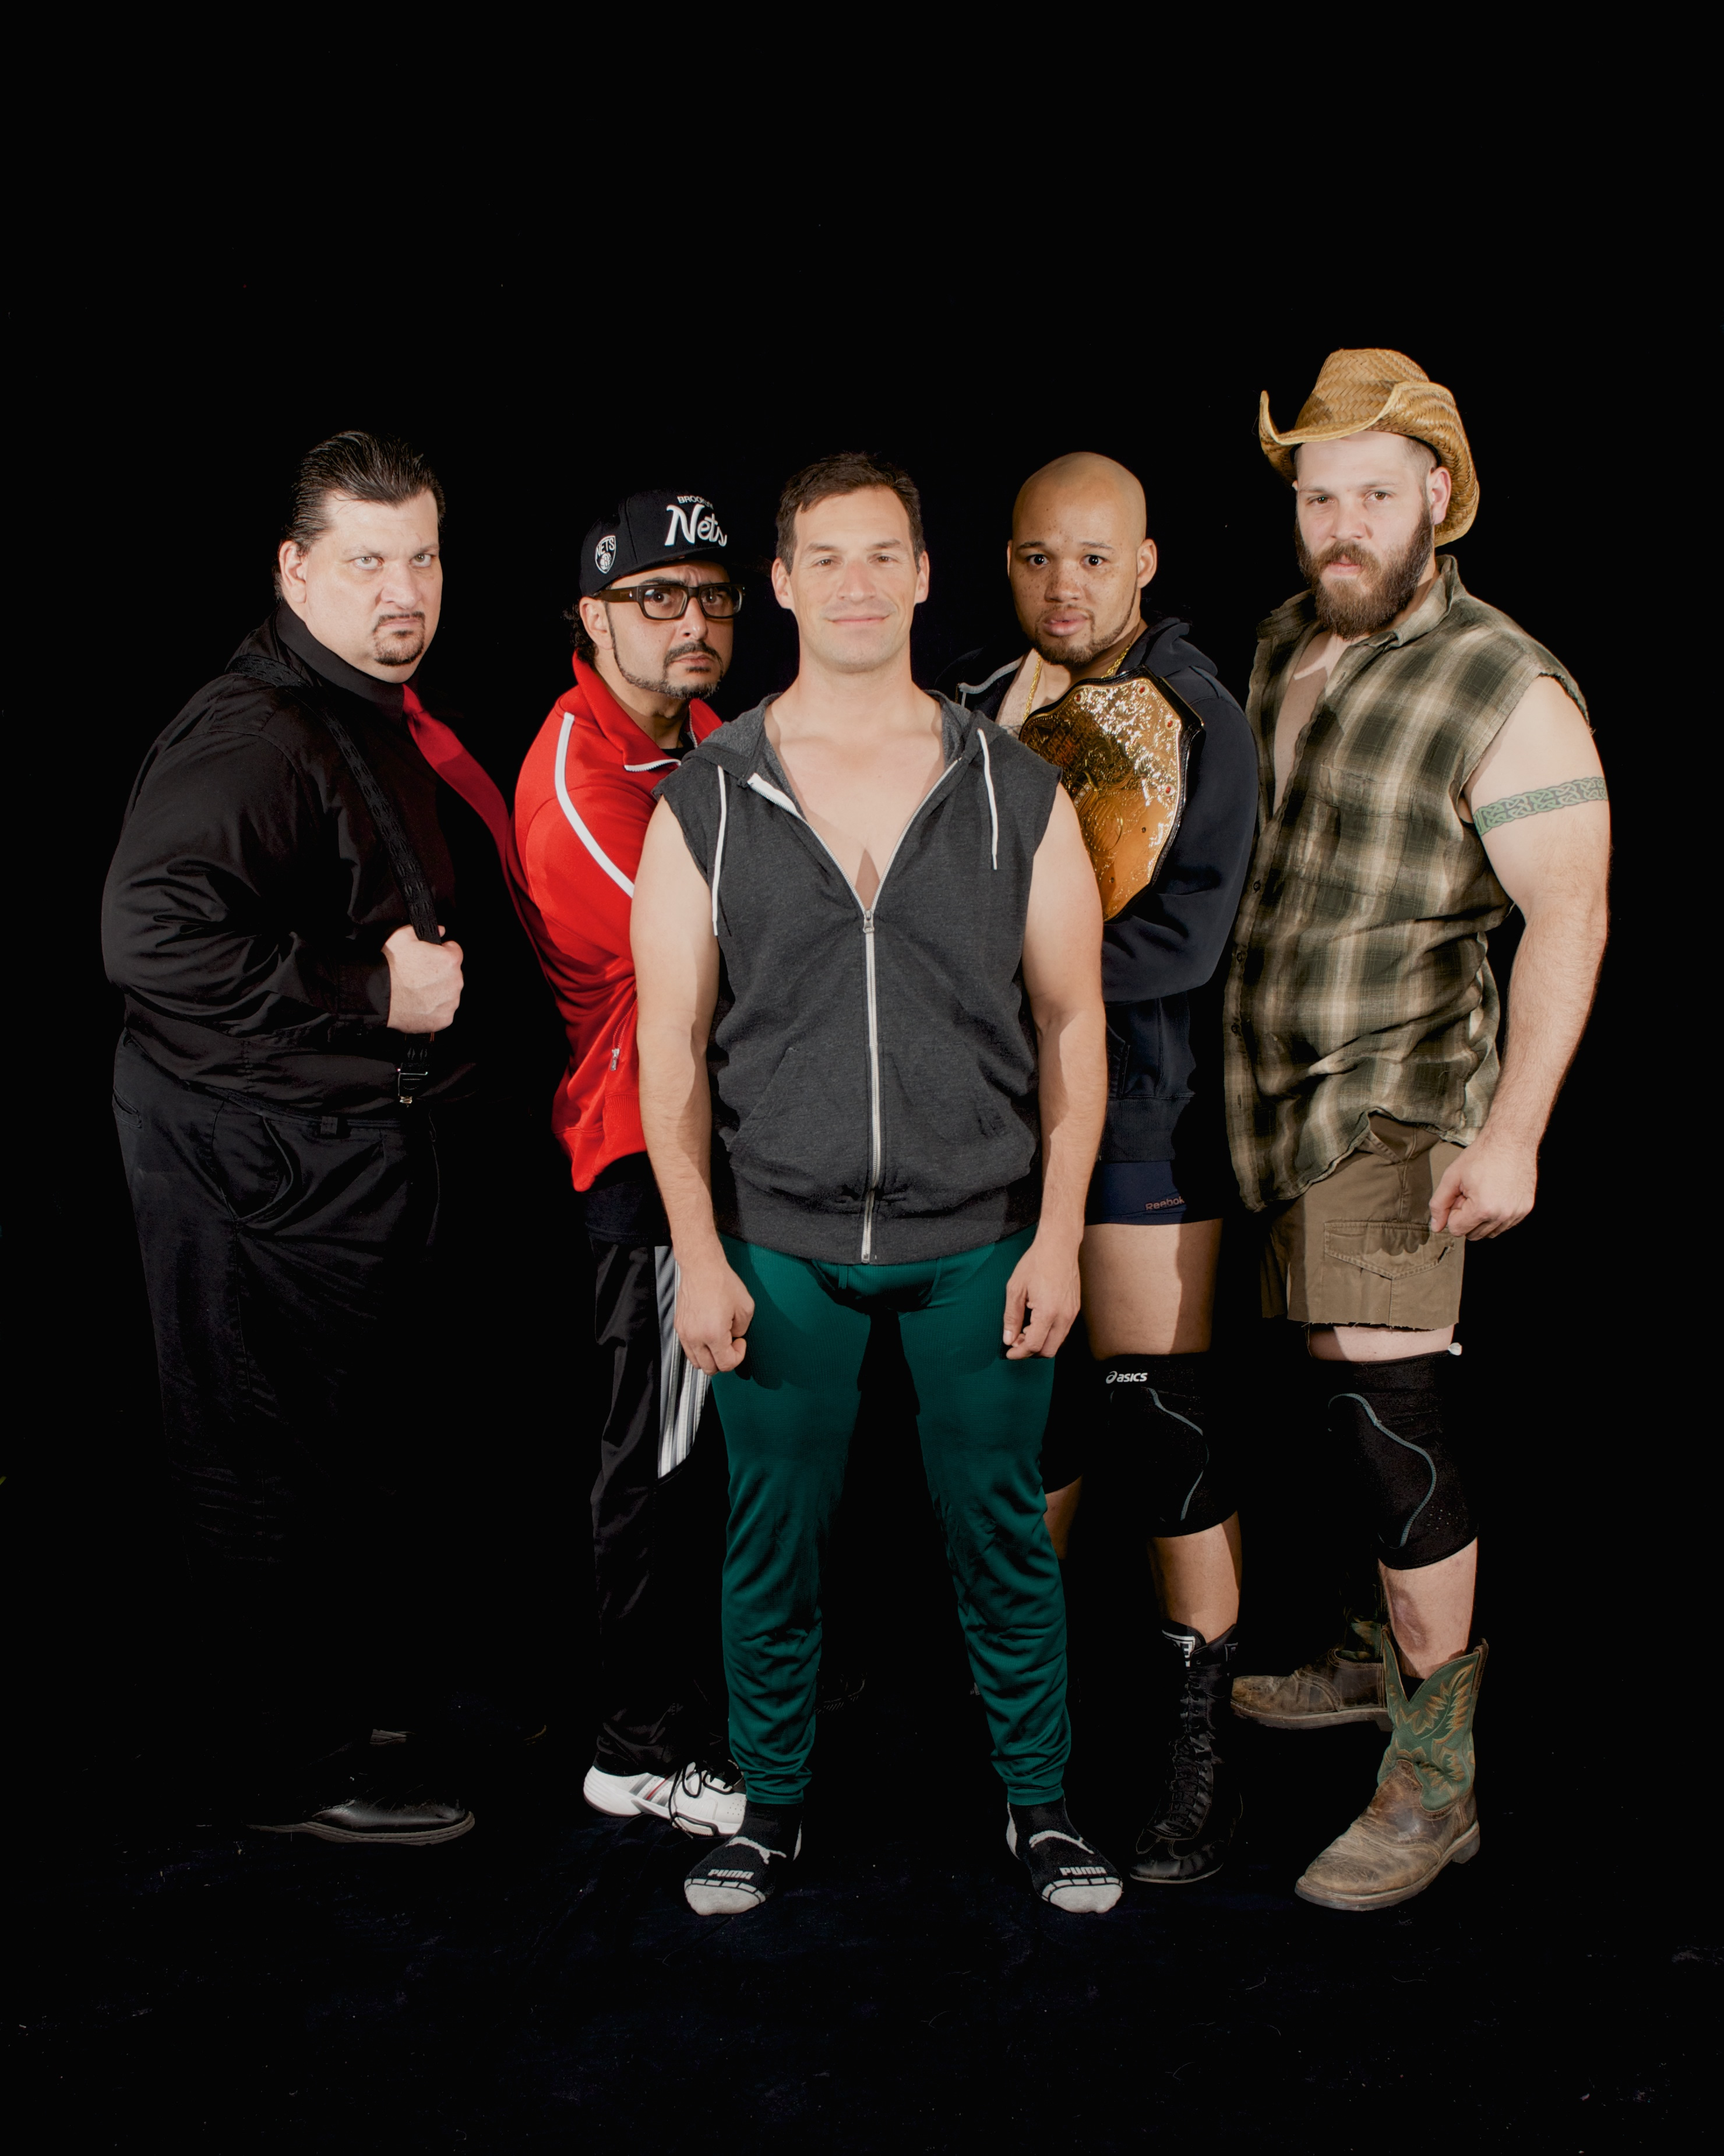 Stray Cat Theatre, "The Elaborate Entrance of Chad Deity," April 2014. Pictured: (l to r) Charles Campbell as EKO, Pasha Yamotahari as VP, Cisco Saavedra as Mace, Jeremy Gillett as Chad Deity and Keath David Hall as The Bad Guy. Photo by John Groseclose.